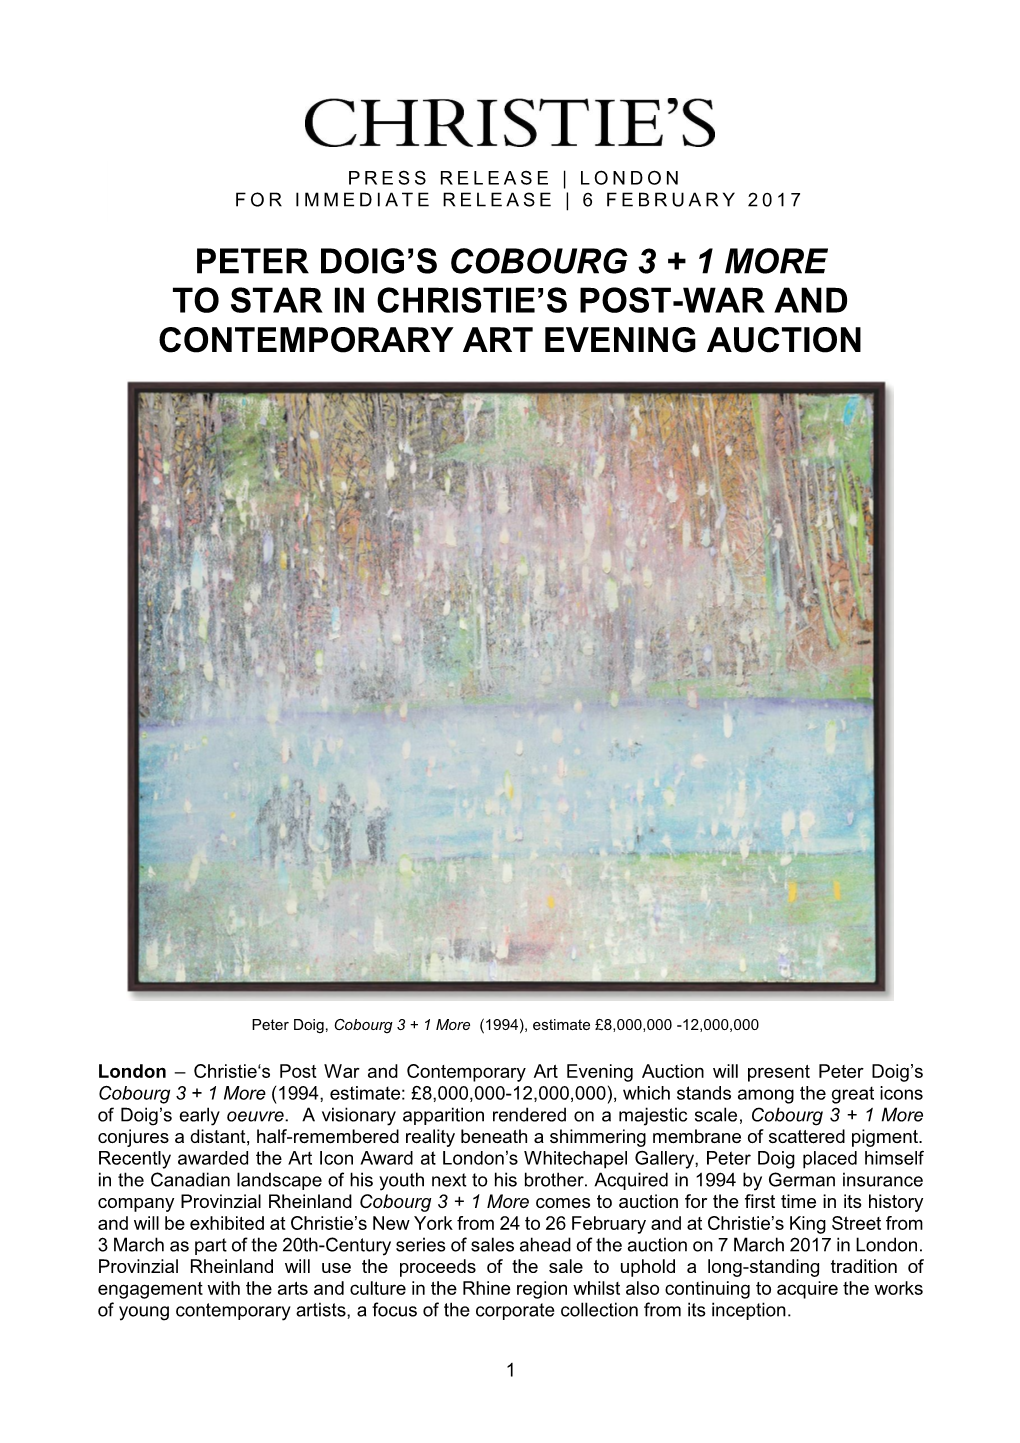 Peter Doig's Cobourg 3 + 1 More to Star in Christie's